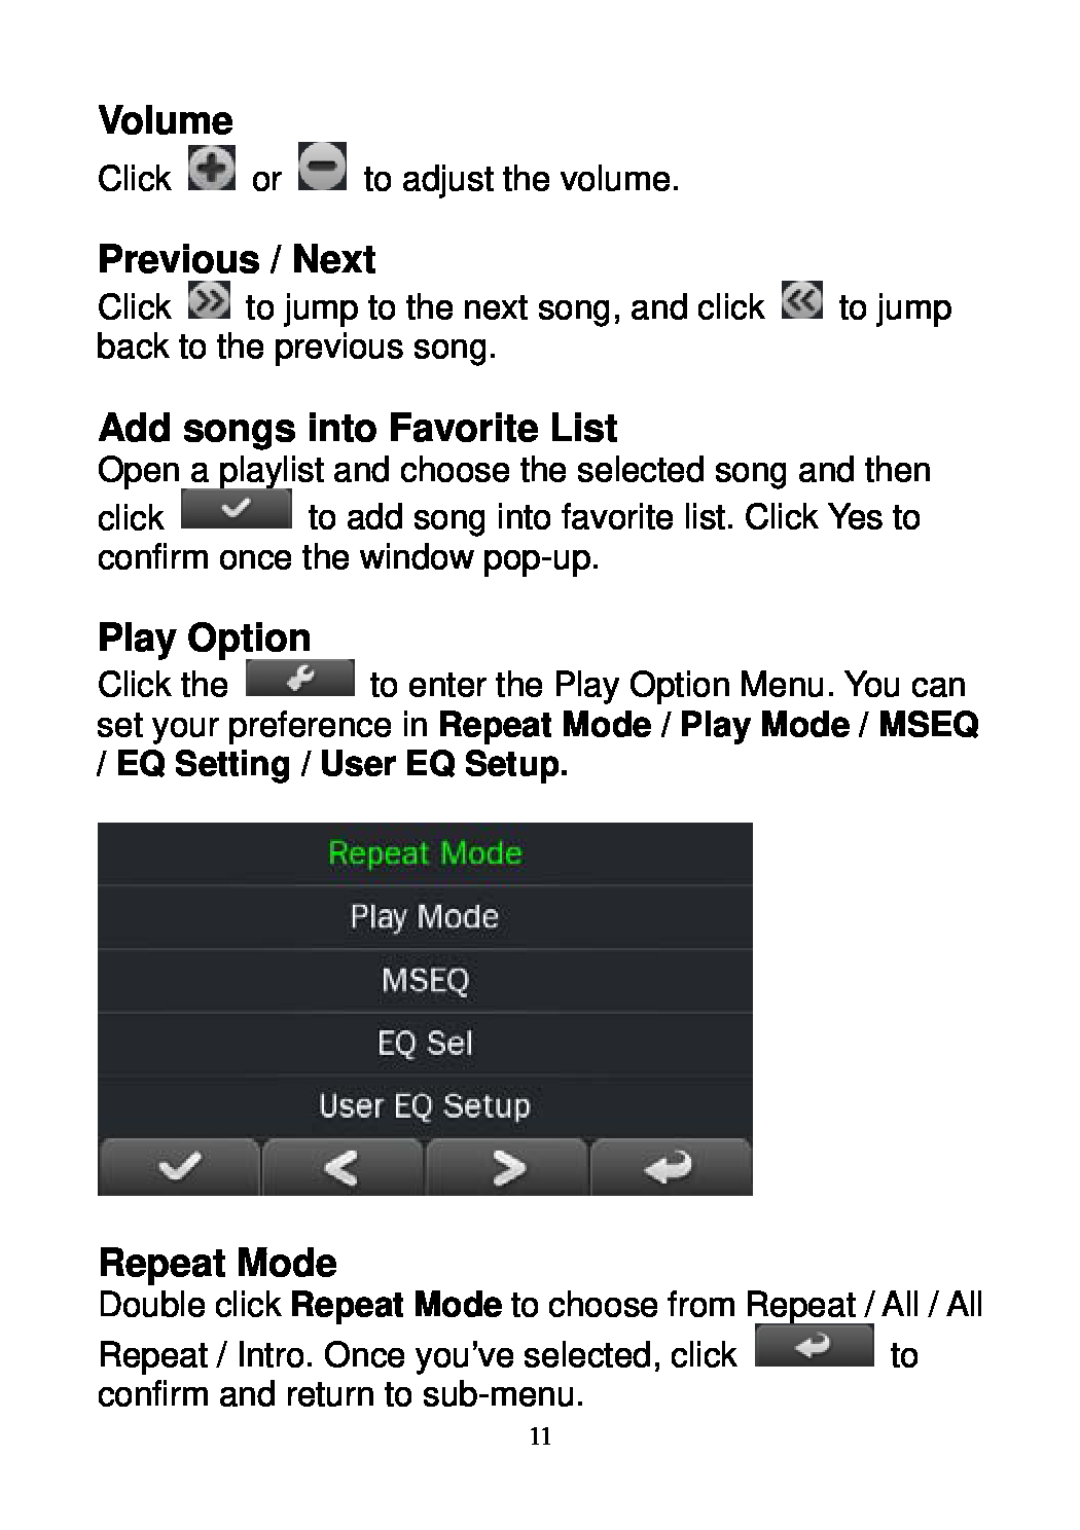 Sylvania SMPK3604 user manual Volume, Previous / Next, Add songs into Favorite List, Play Option, Repeat Mode 